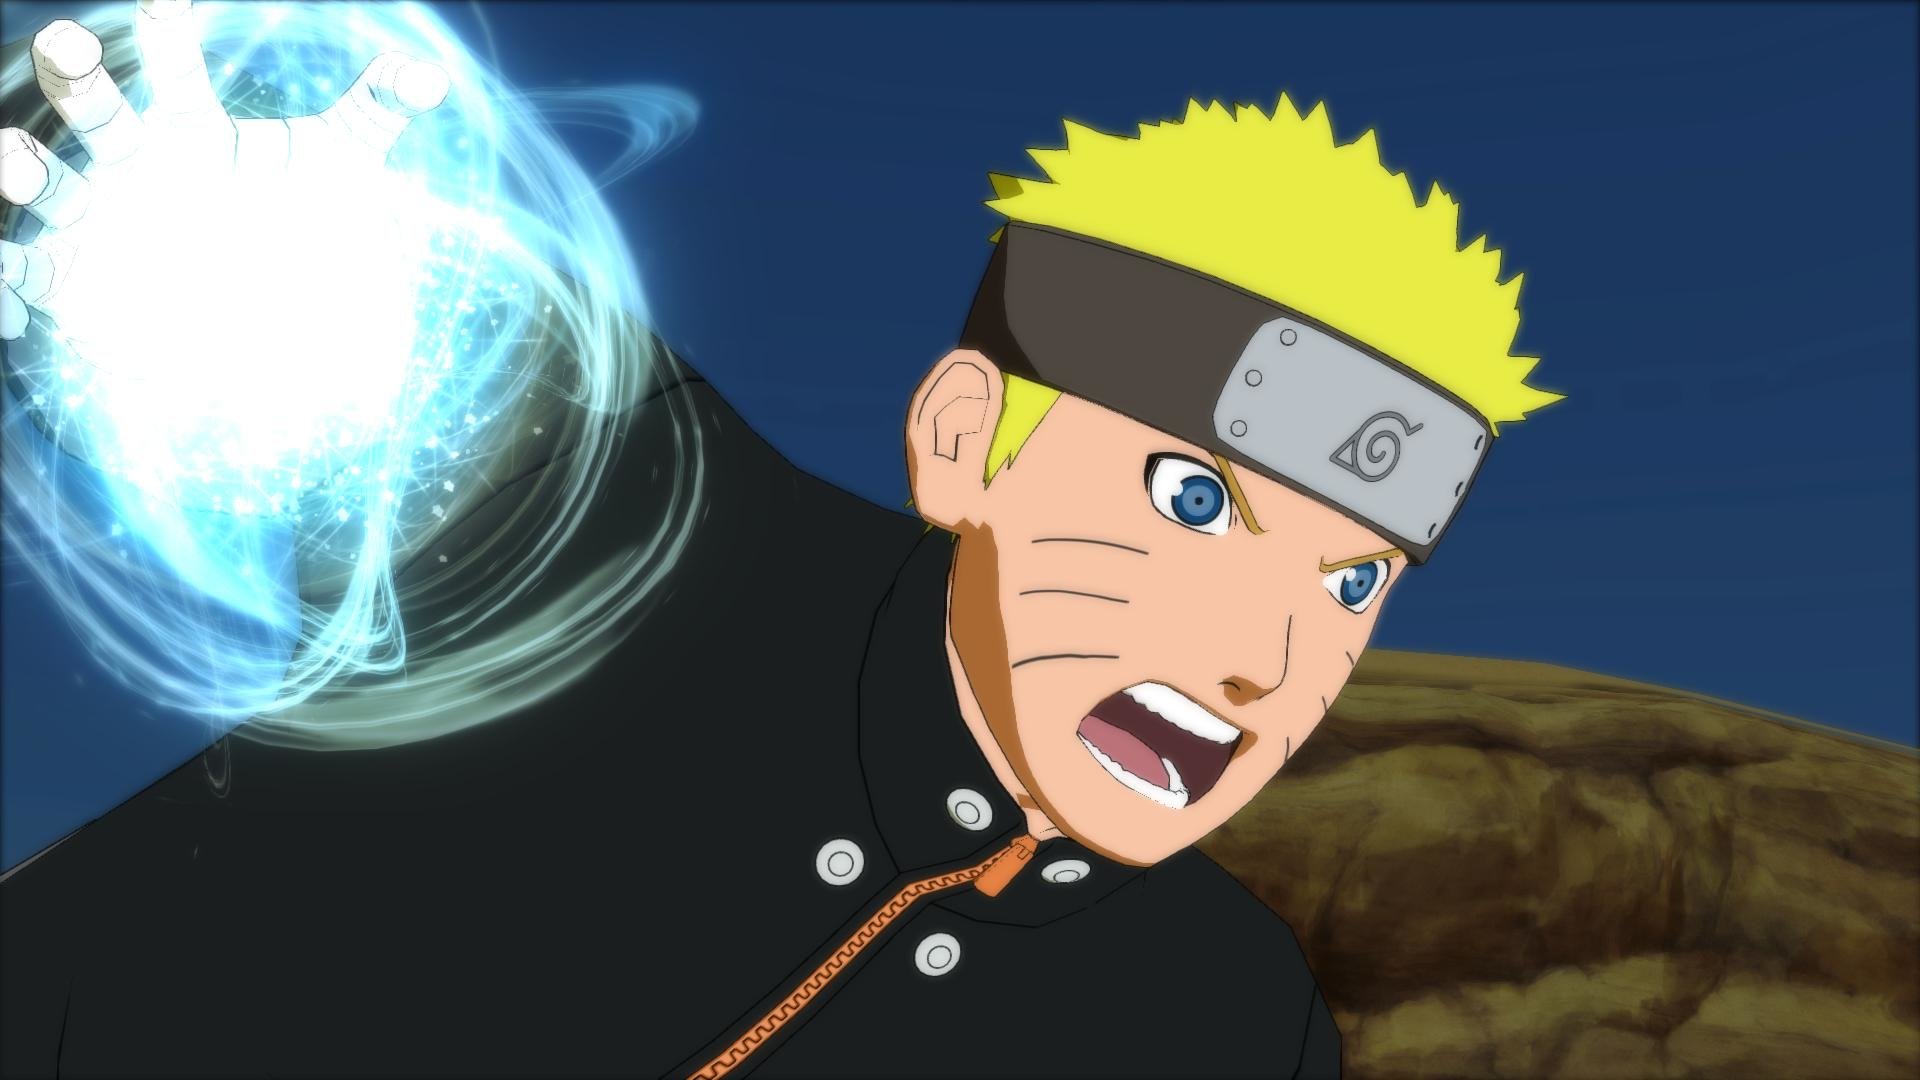 Awesome Naruto Shippuden: Ultimate Ninja Storm 4 free background ID:408812 for full hd 1920x1080 computer